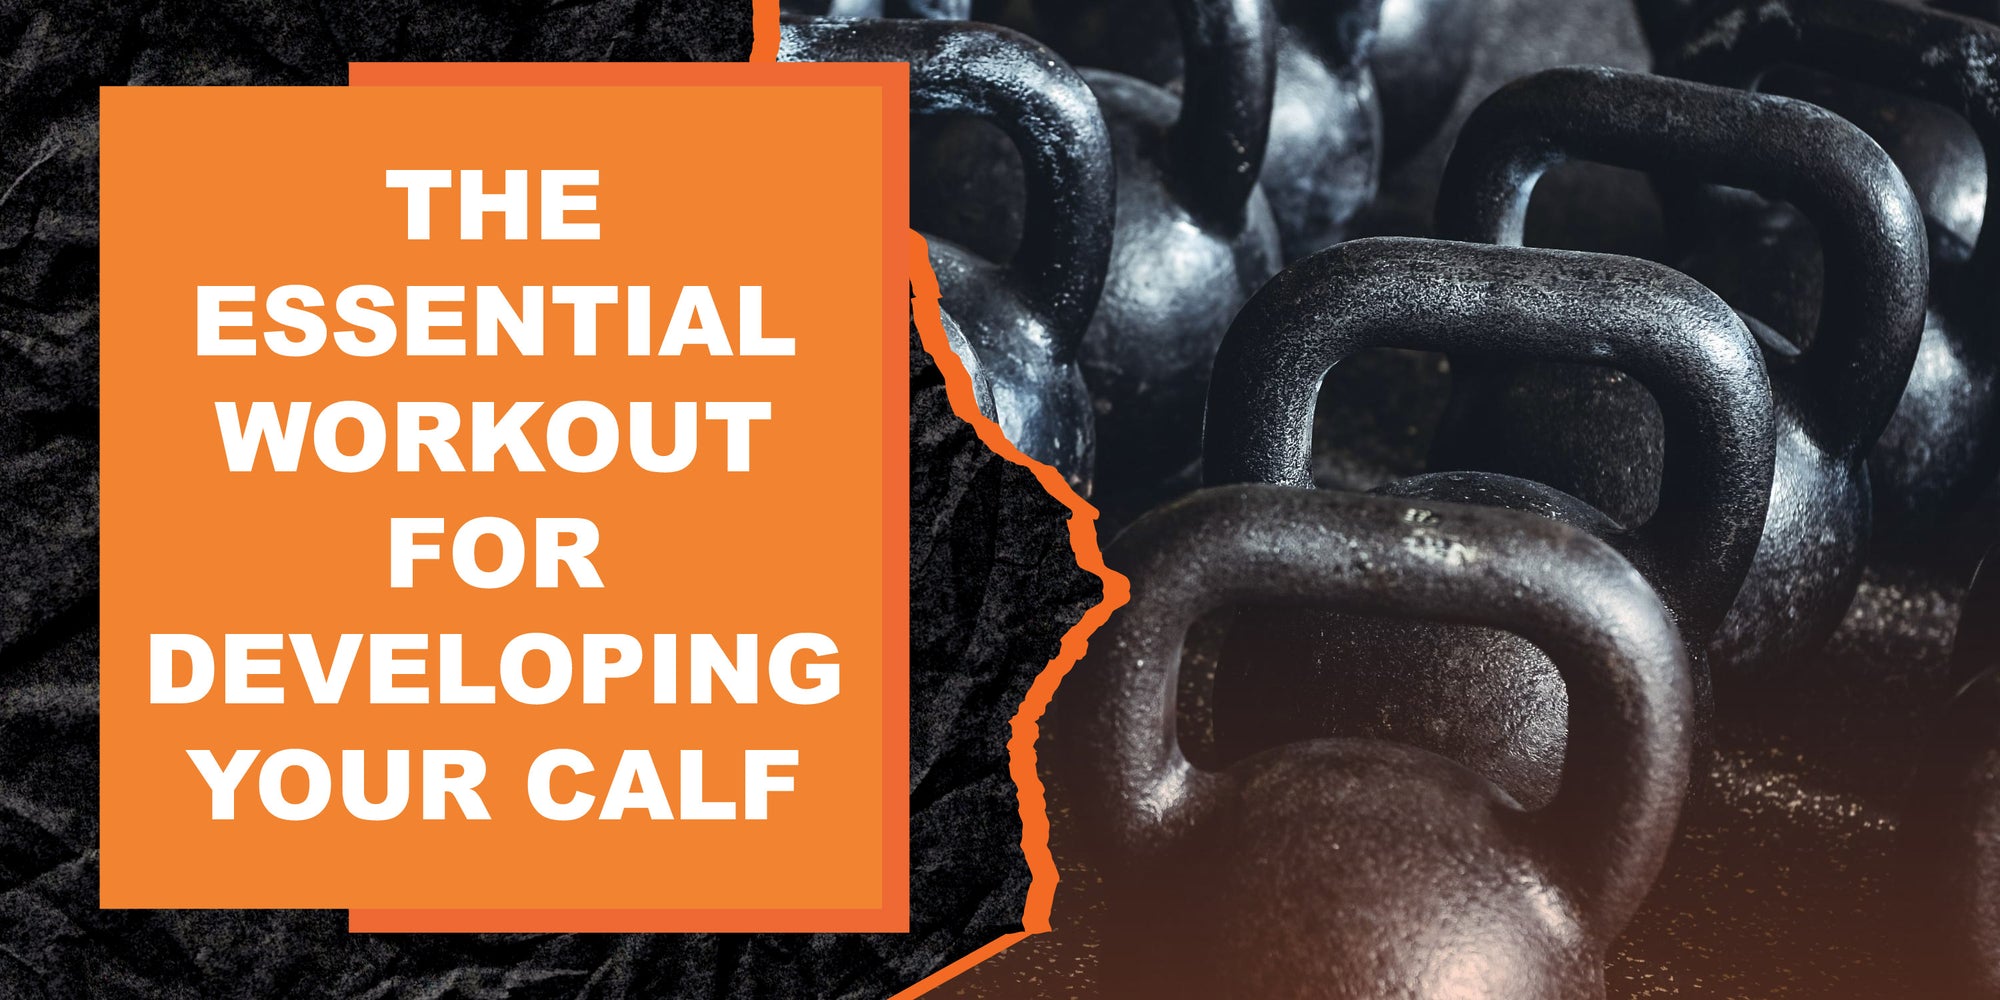 The Essential Workout for Developing Your Calf